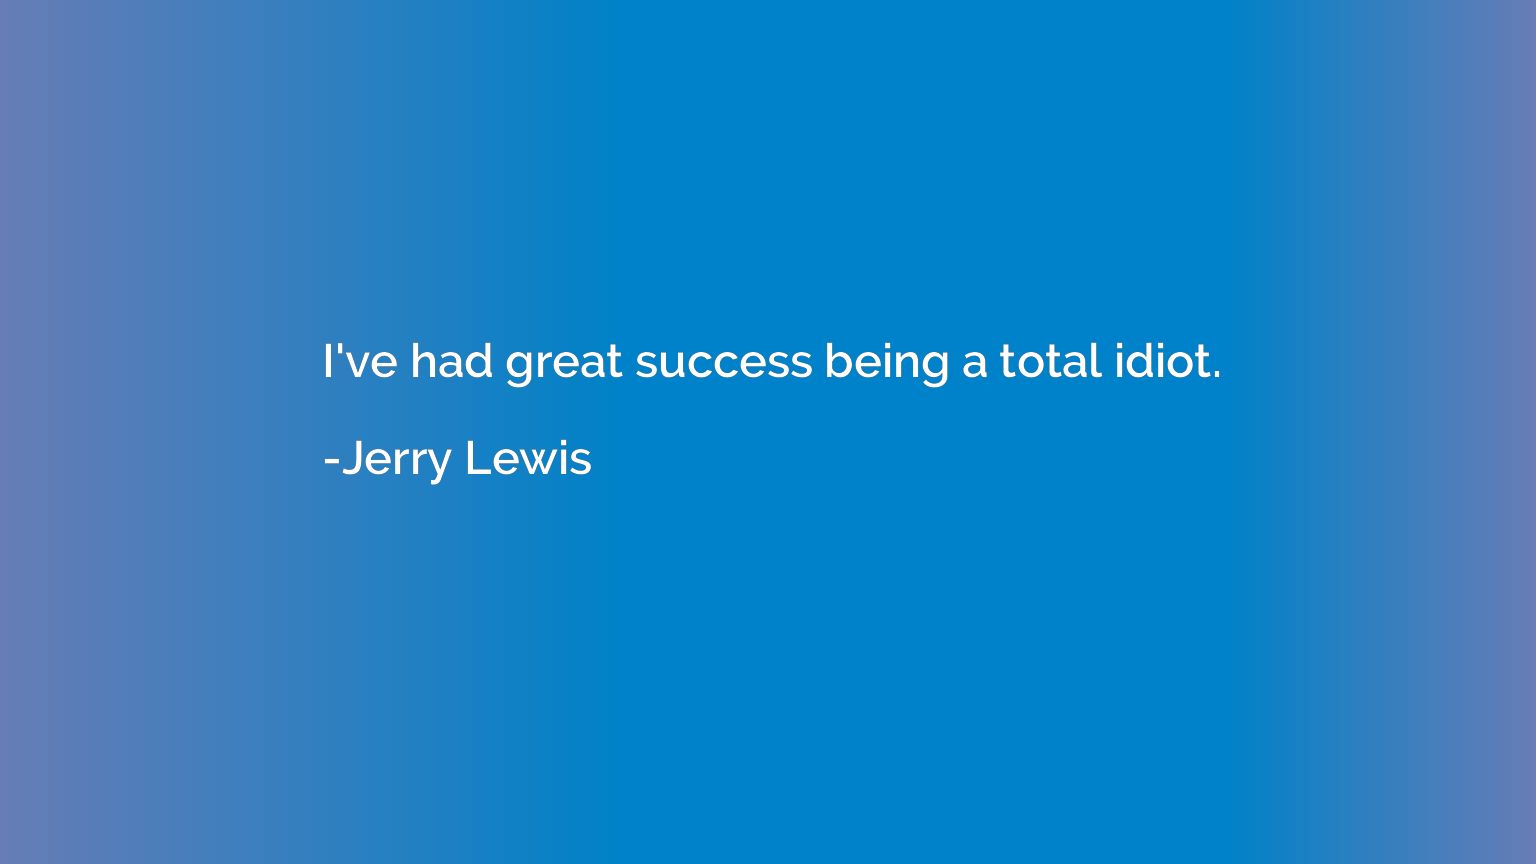 I've had great success being a total idiot.